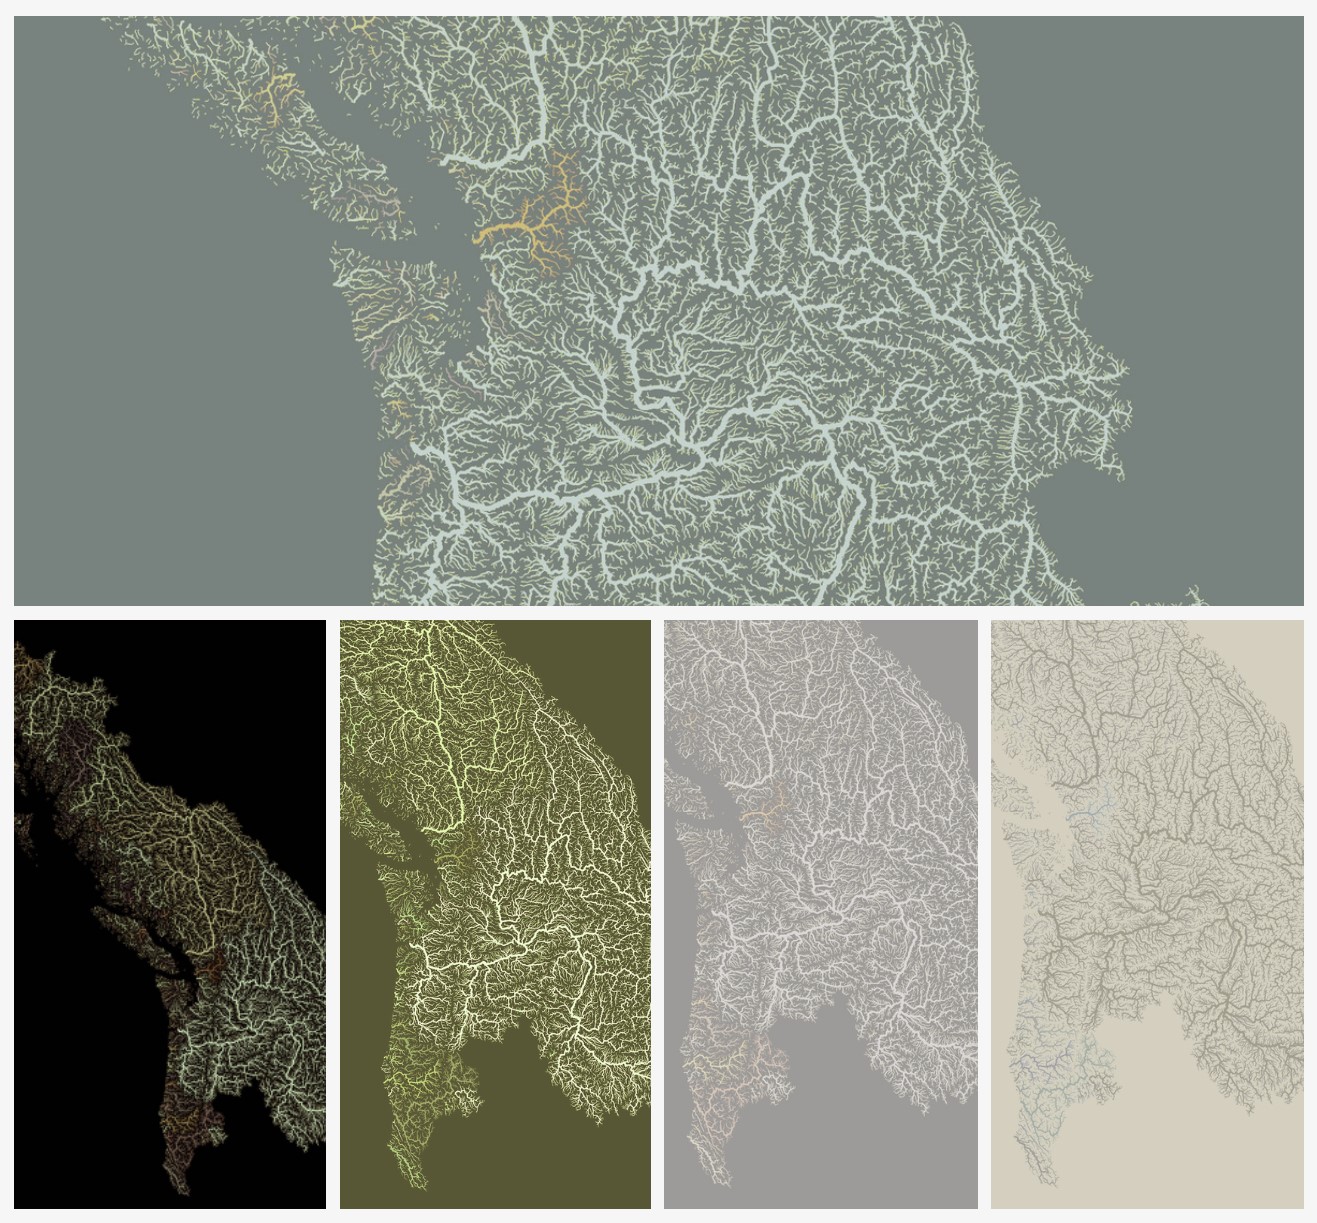 Series of images each depicting densely packed wiggly lines that show waterflow on bodies of land